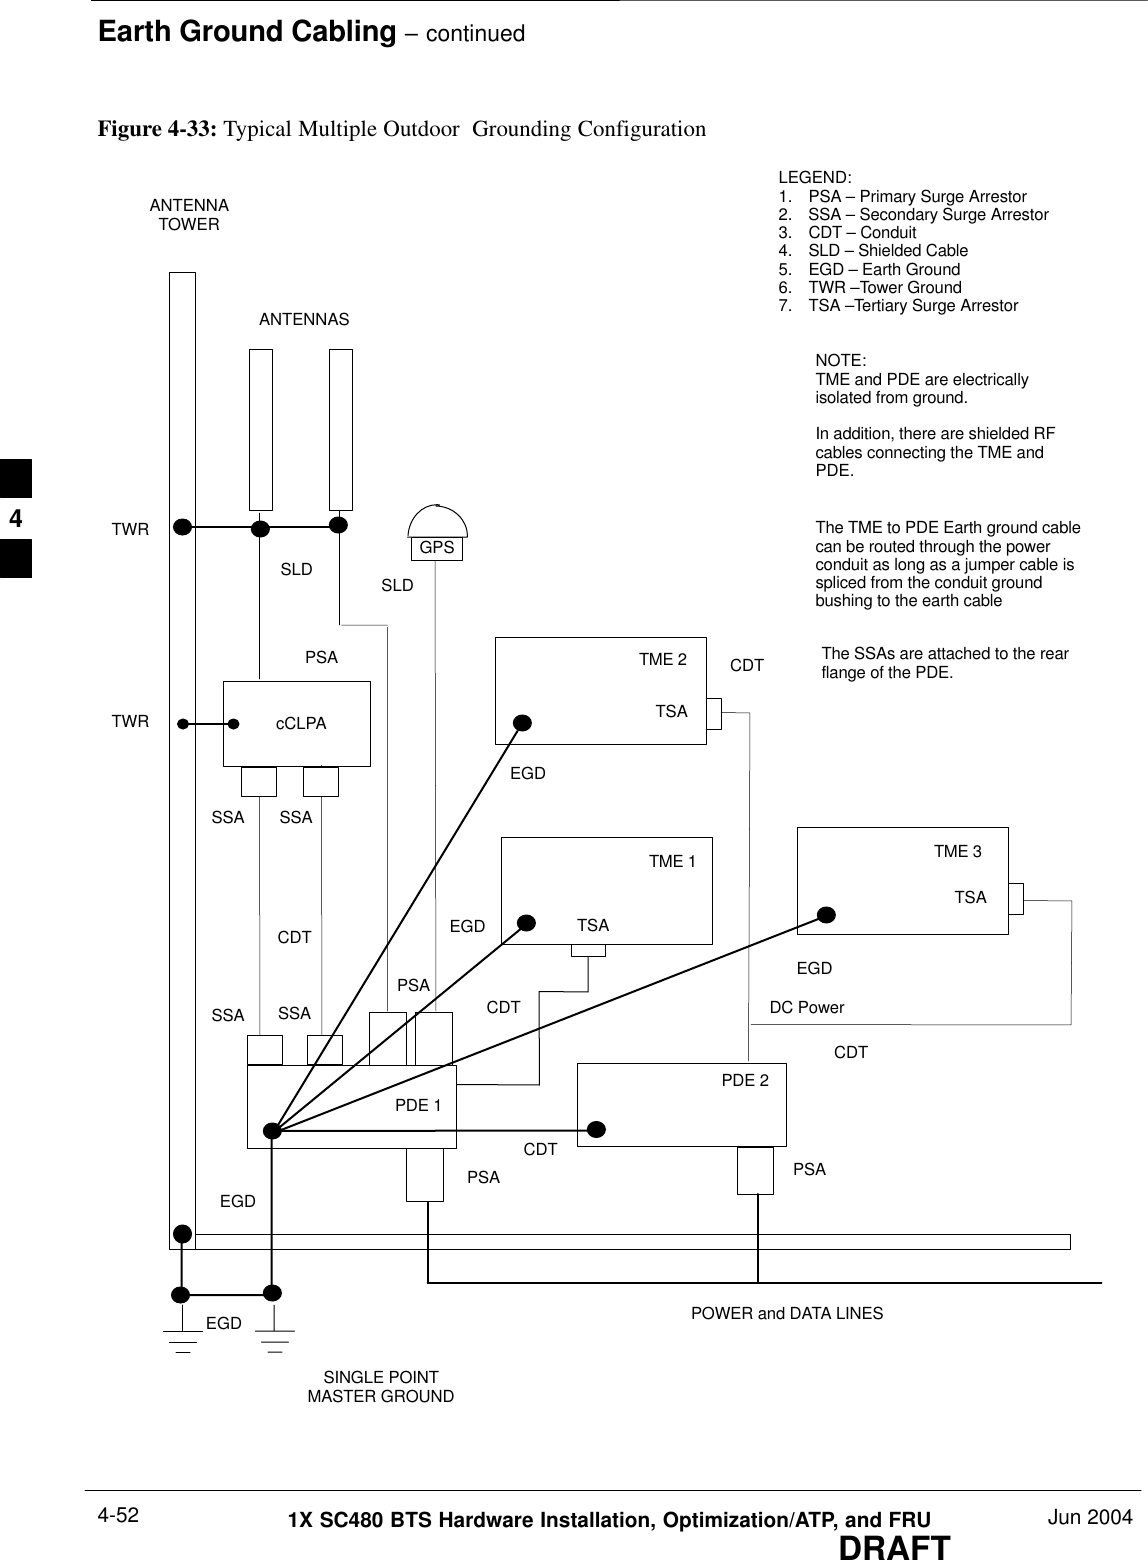 Earth Ground Cabling – continuedDRAFT1X SC480 BTS Hardware Installation, Optimization/ATP, and FRU Jun 20044-52Figure 4-33: Typical Multiple Outdoor  Grounding ConfigurationLEGEND:1. PSA – Primary Surge Arrestor2. SSA – Secondary Surge Arrestor3. CDT – Conduit4. SLD – Shielded Cable5. EGD – Earth Ground6. TWR –Tower Ground7. TSA –Tertiary Surge ArrestorSLDPDE 1TME 1GPScCLPAANTENNASANTENNATOWERPSAPSAPSASSA CDTPOWER and DATA LINESSINGLE POINTMASTER GROUNDEGDEGDEGDSLDCDTTWRTWRPDE 2TME 2TME 3PSAEGDEGDCDTCDTTSATSATSANOTE:TME and PDE are electricallyisolated from ground.In addition, there are shielded RFcables connecting the TME andPDE.CDTThe TME to PDE Earth ground cablecan be routed through the powerconduit as long as a jumper cable isspliced from the conduit groundbushing to the earth cableSSA SSASSAThe SSAs are attached to the rearflange of the PDE.DC Power4